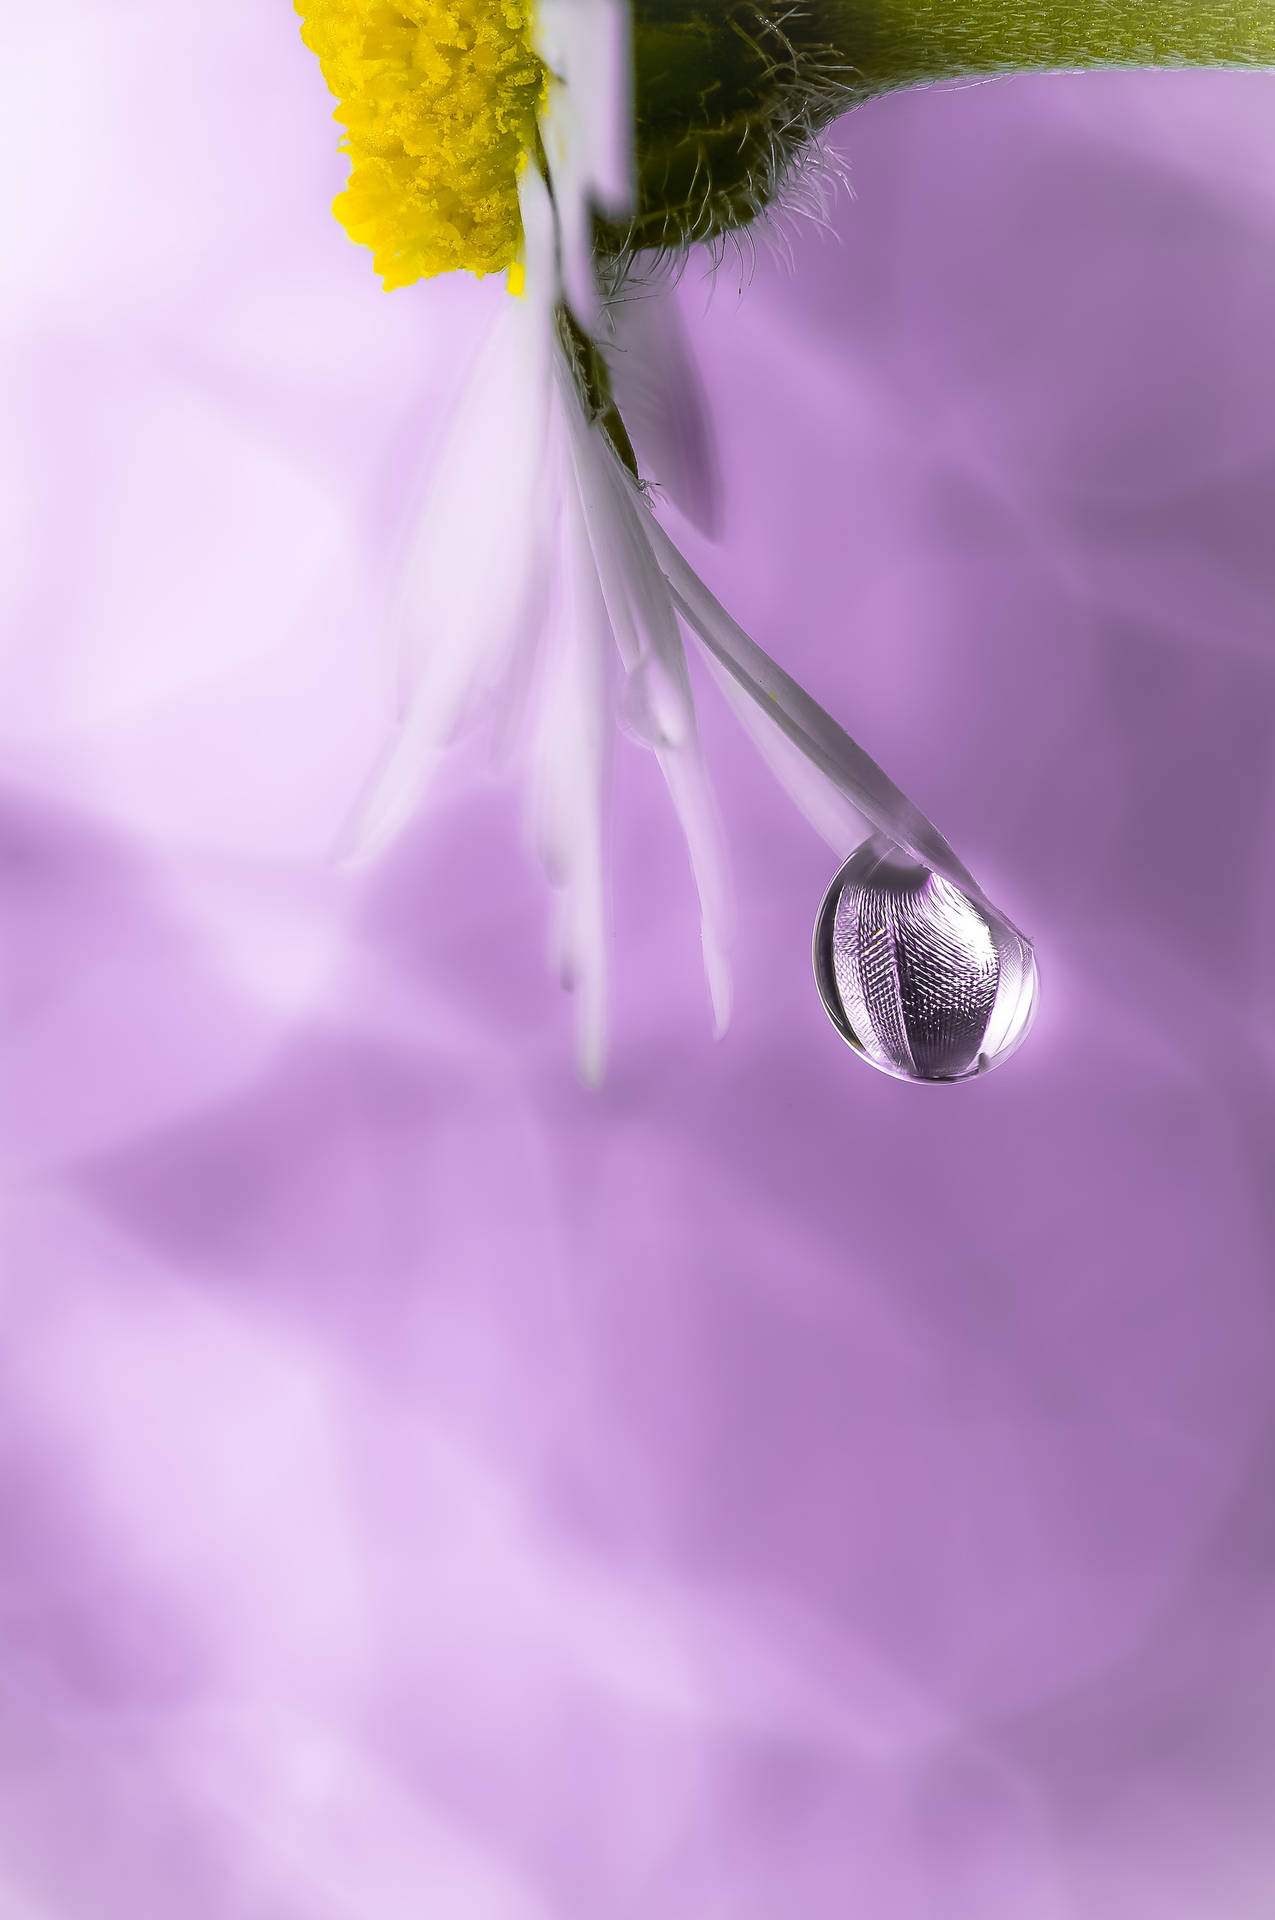 Water Droplet Flower Petal Android